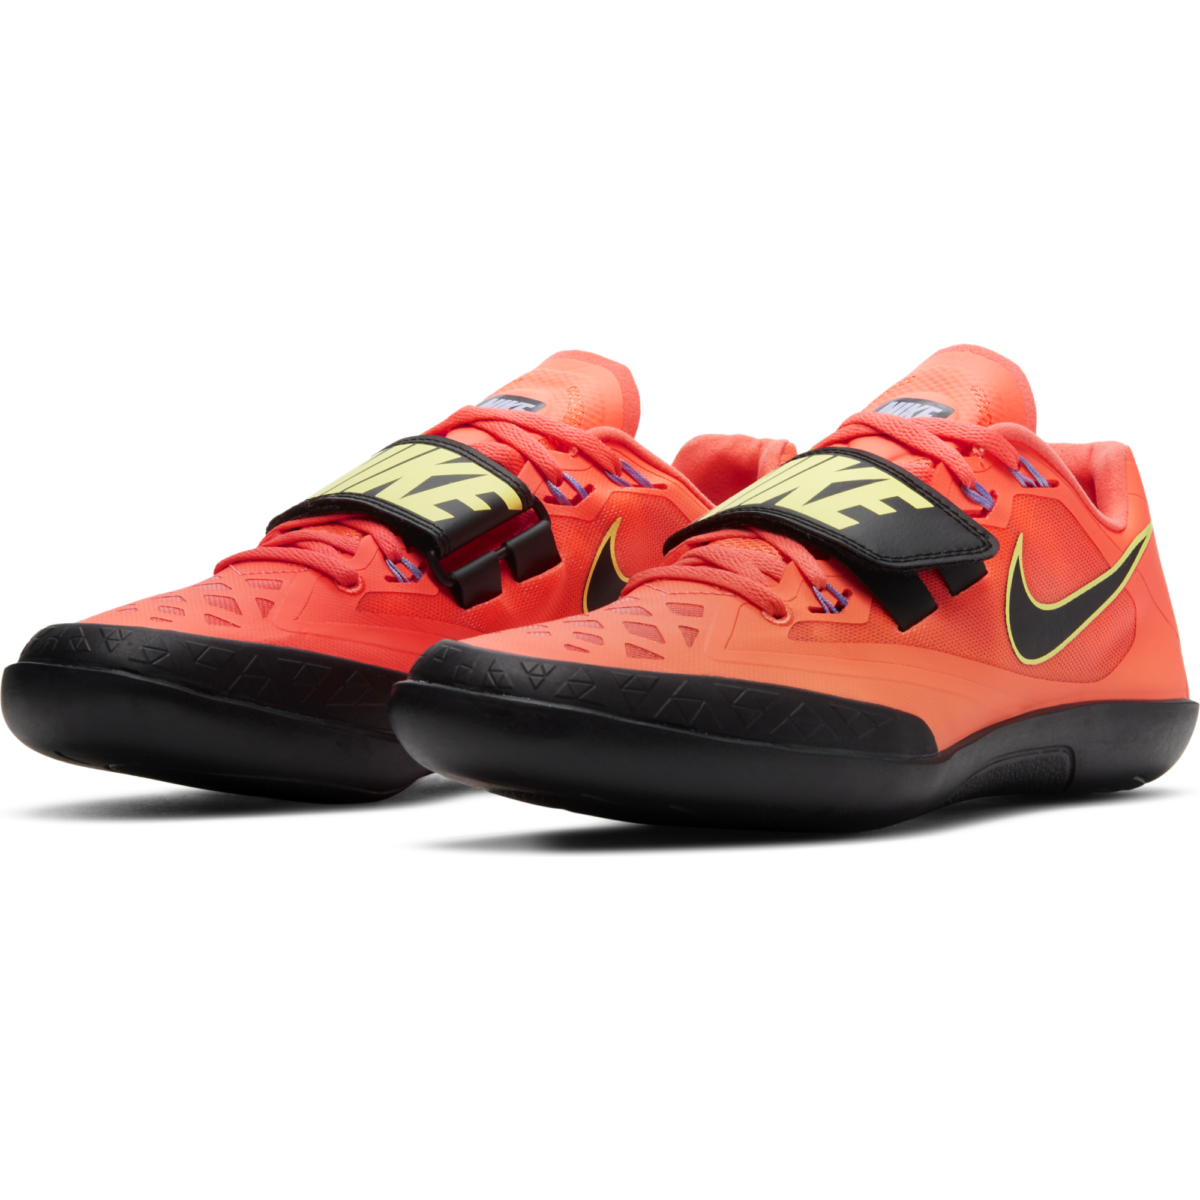 Unisex Nike Zoom SD 4 Throwing Shoes 685135-800